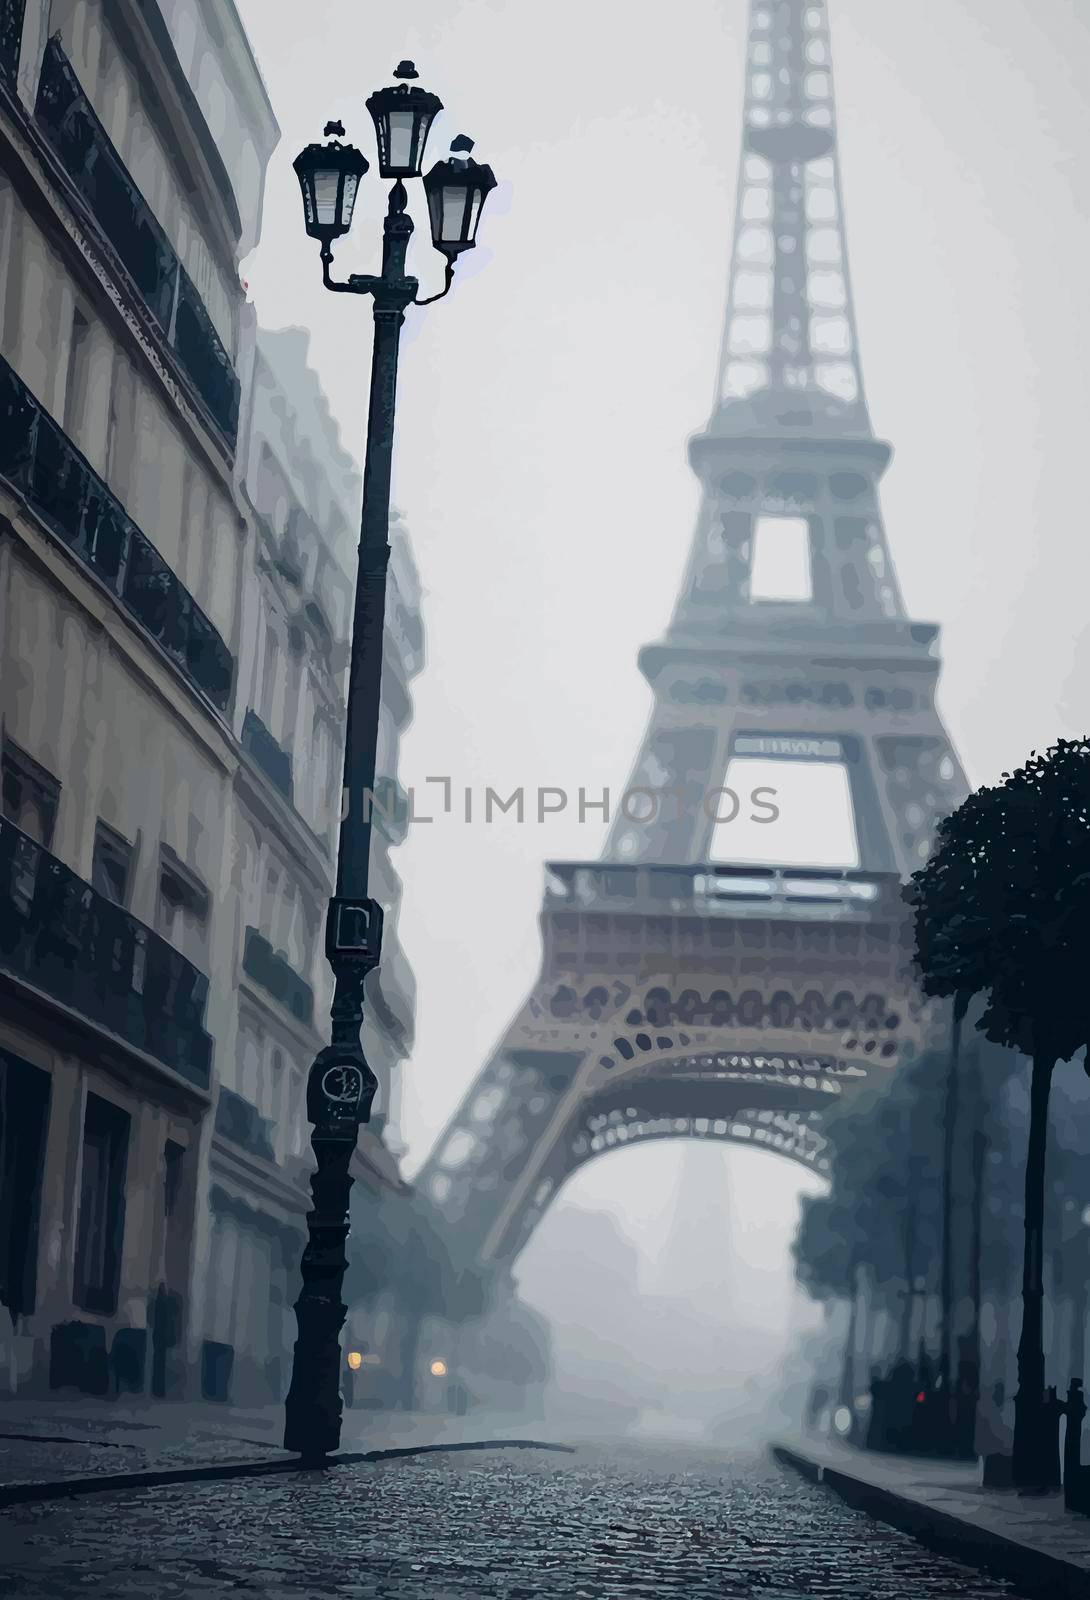 view of paris street with the Eiffel Tower in the background in a foggy day.